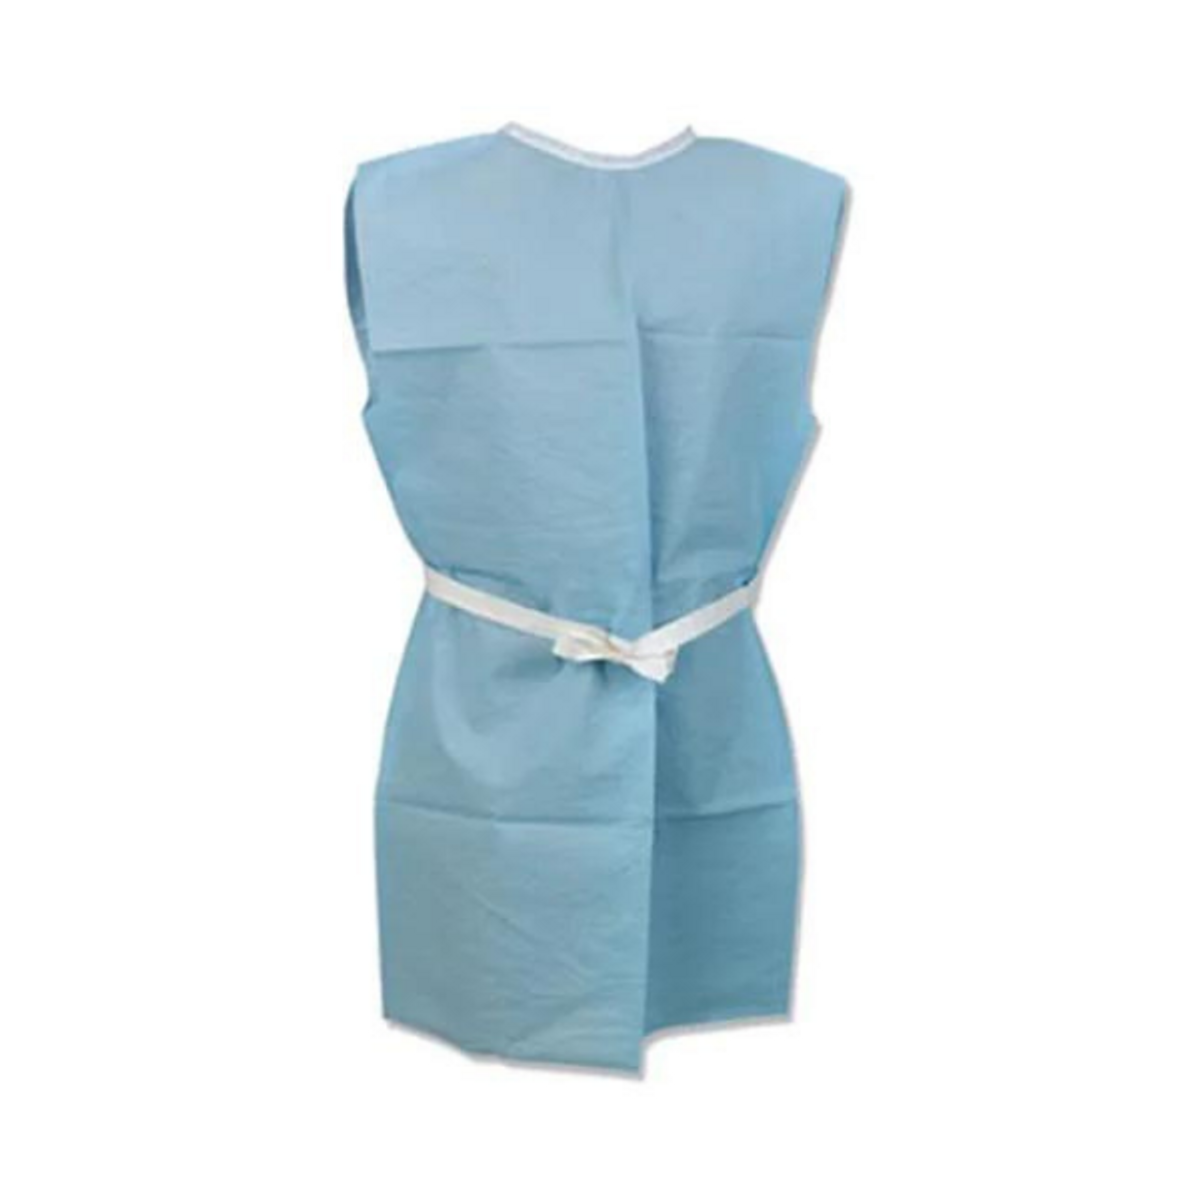 Tidi 3 Ply, All Tissue Patient Gown